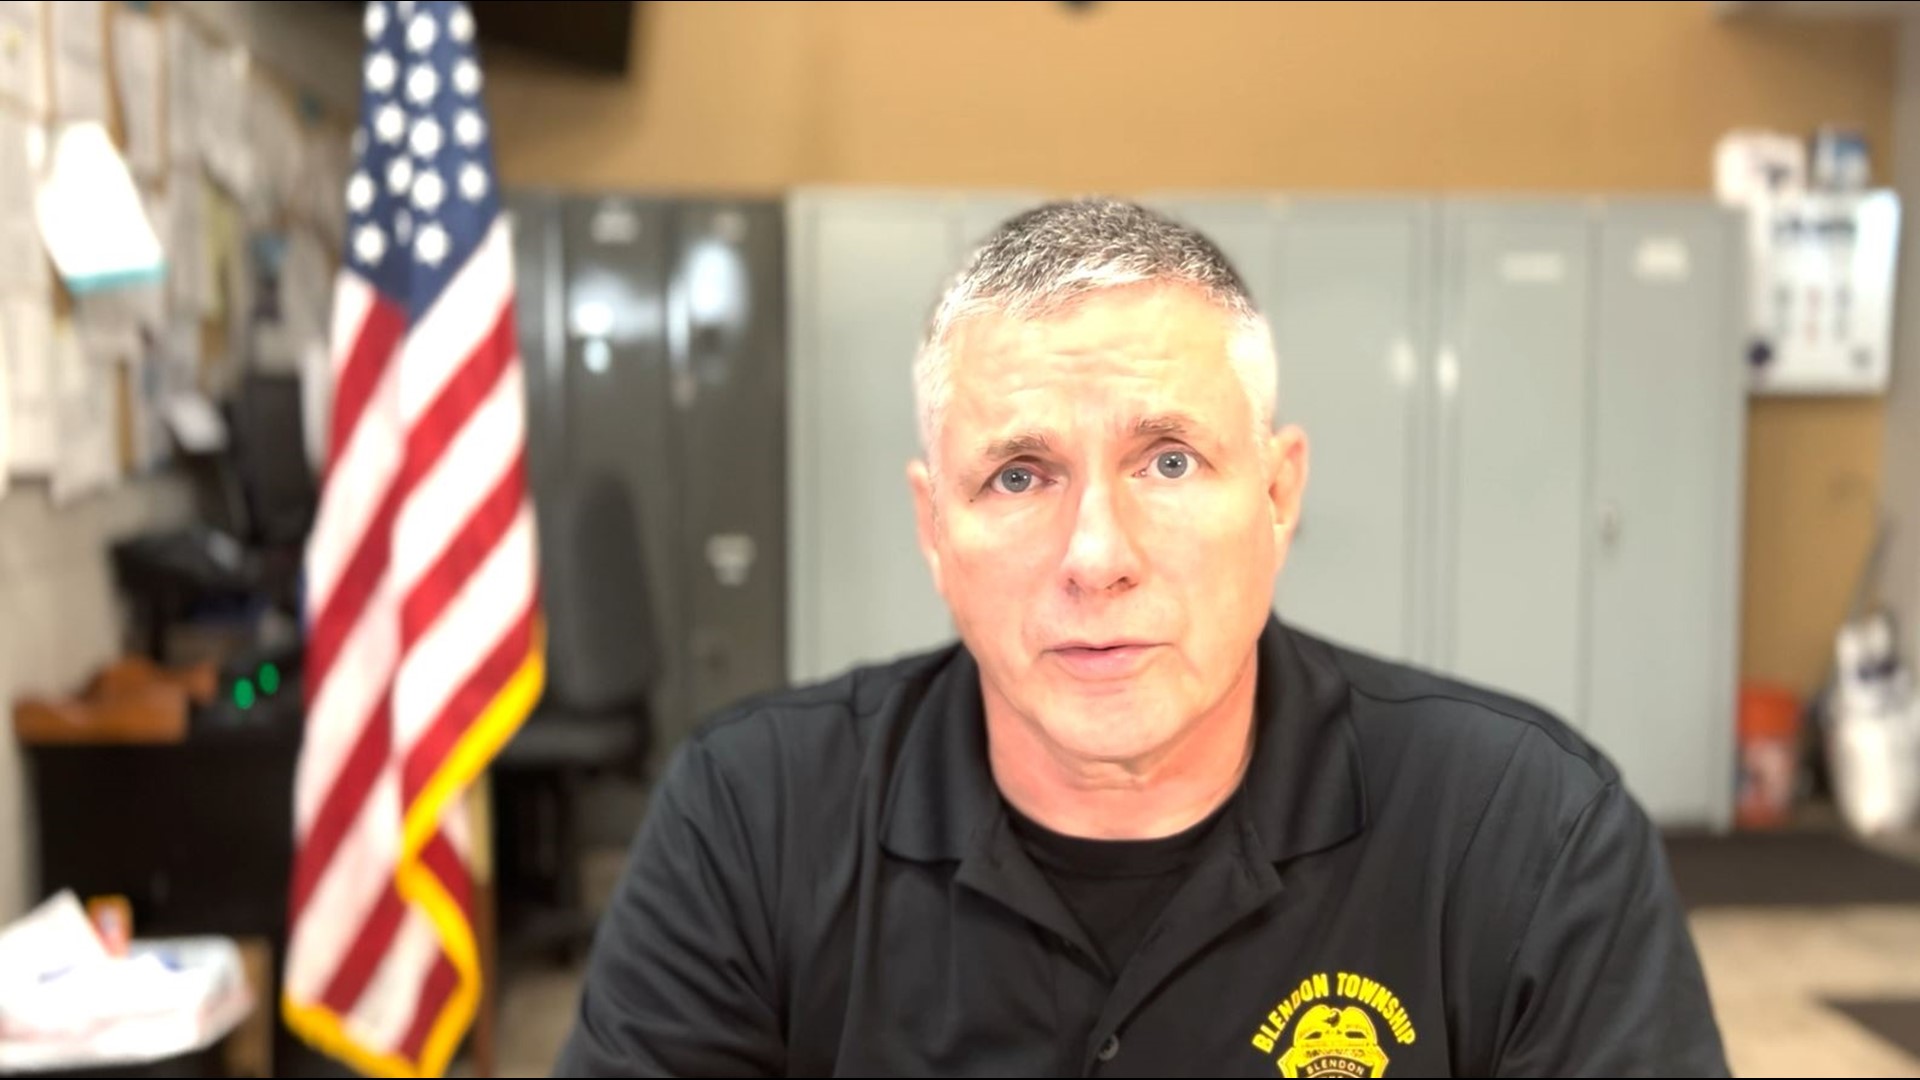 The Blendon Township police chief provided an update through a video message on a shooting where a pregnant woman was fatally shot by an officer.